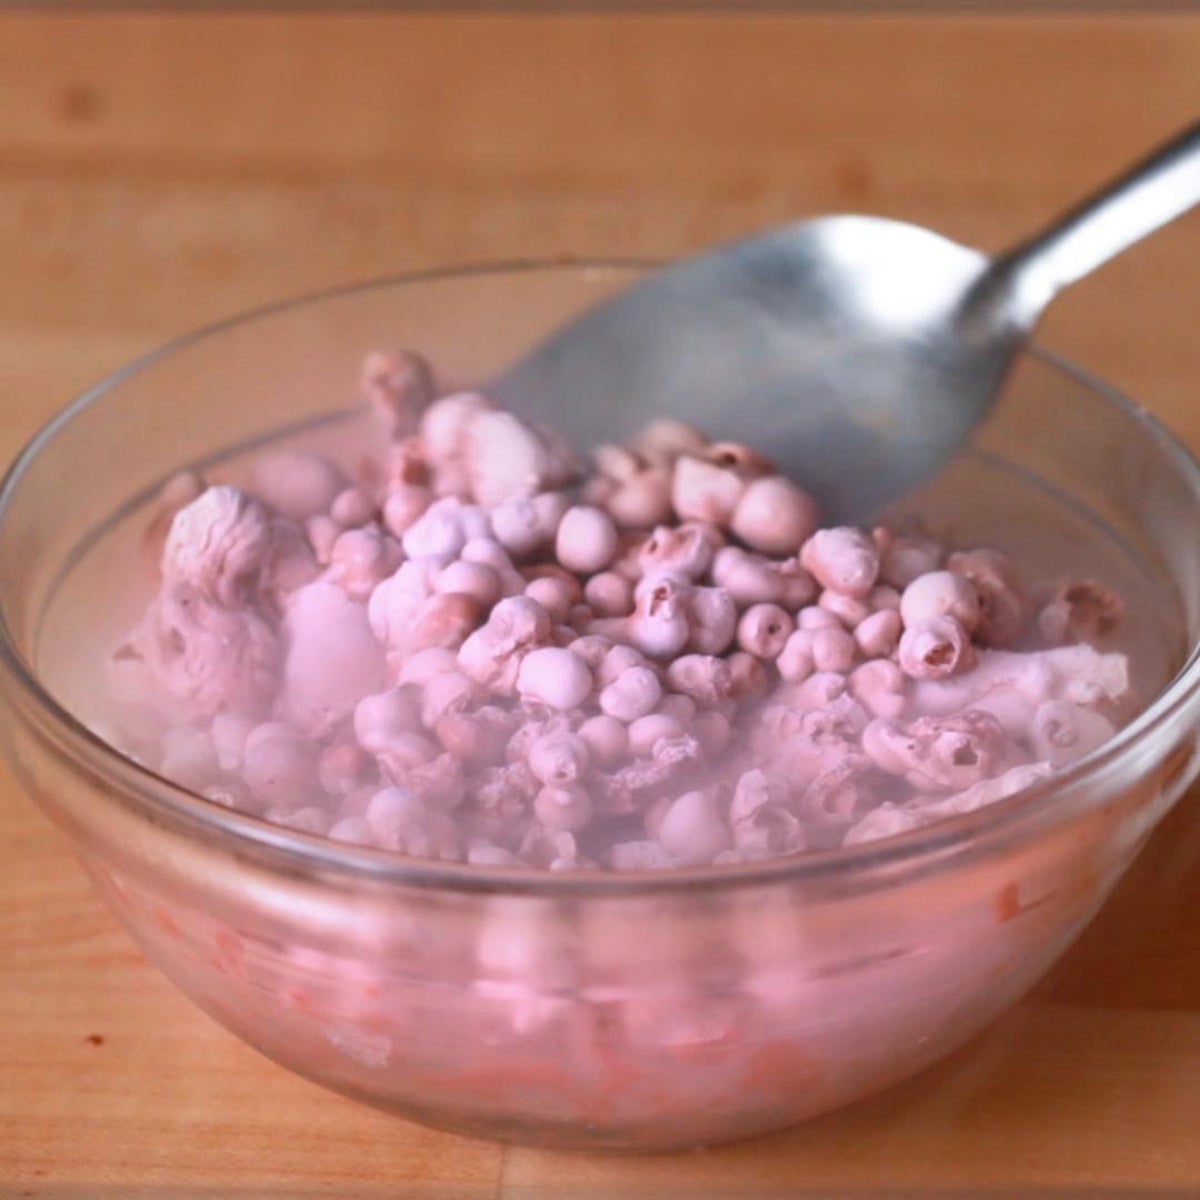 How to Make Your Own Dippin' Dots Ice Cream with Liquid Nitrogen